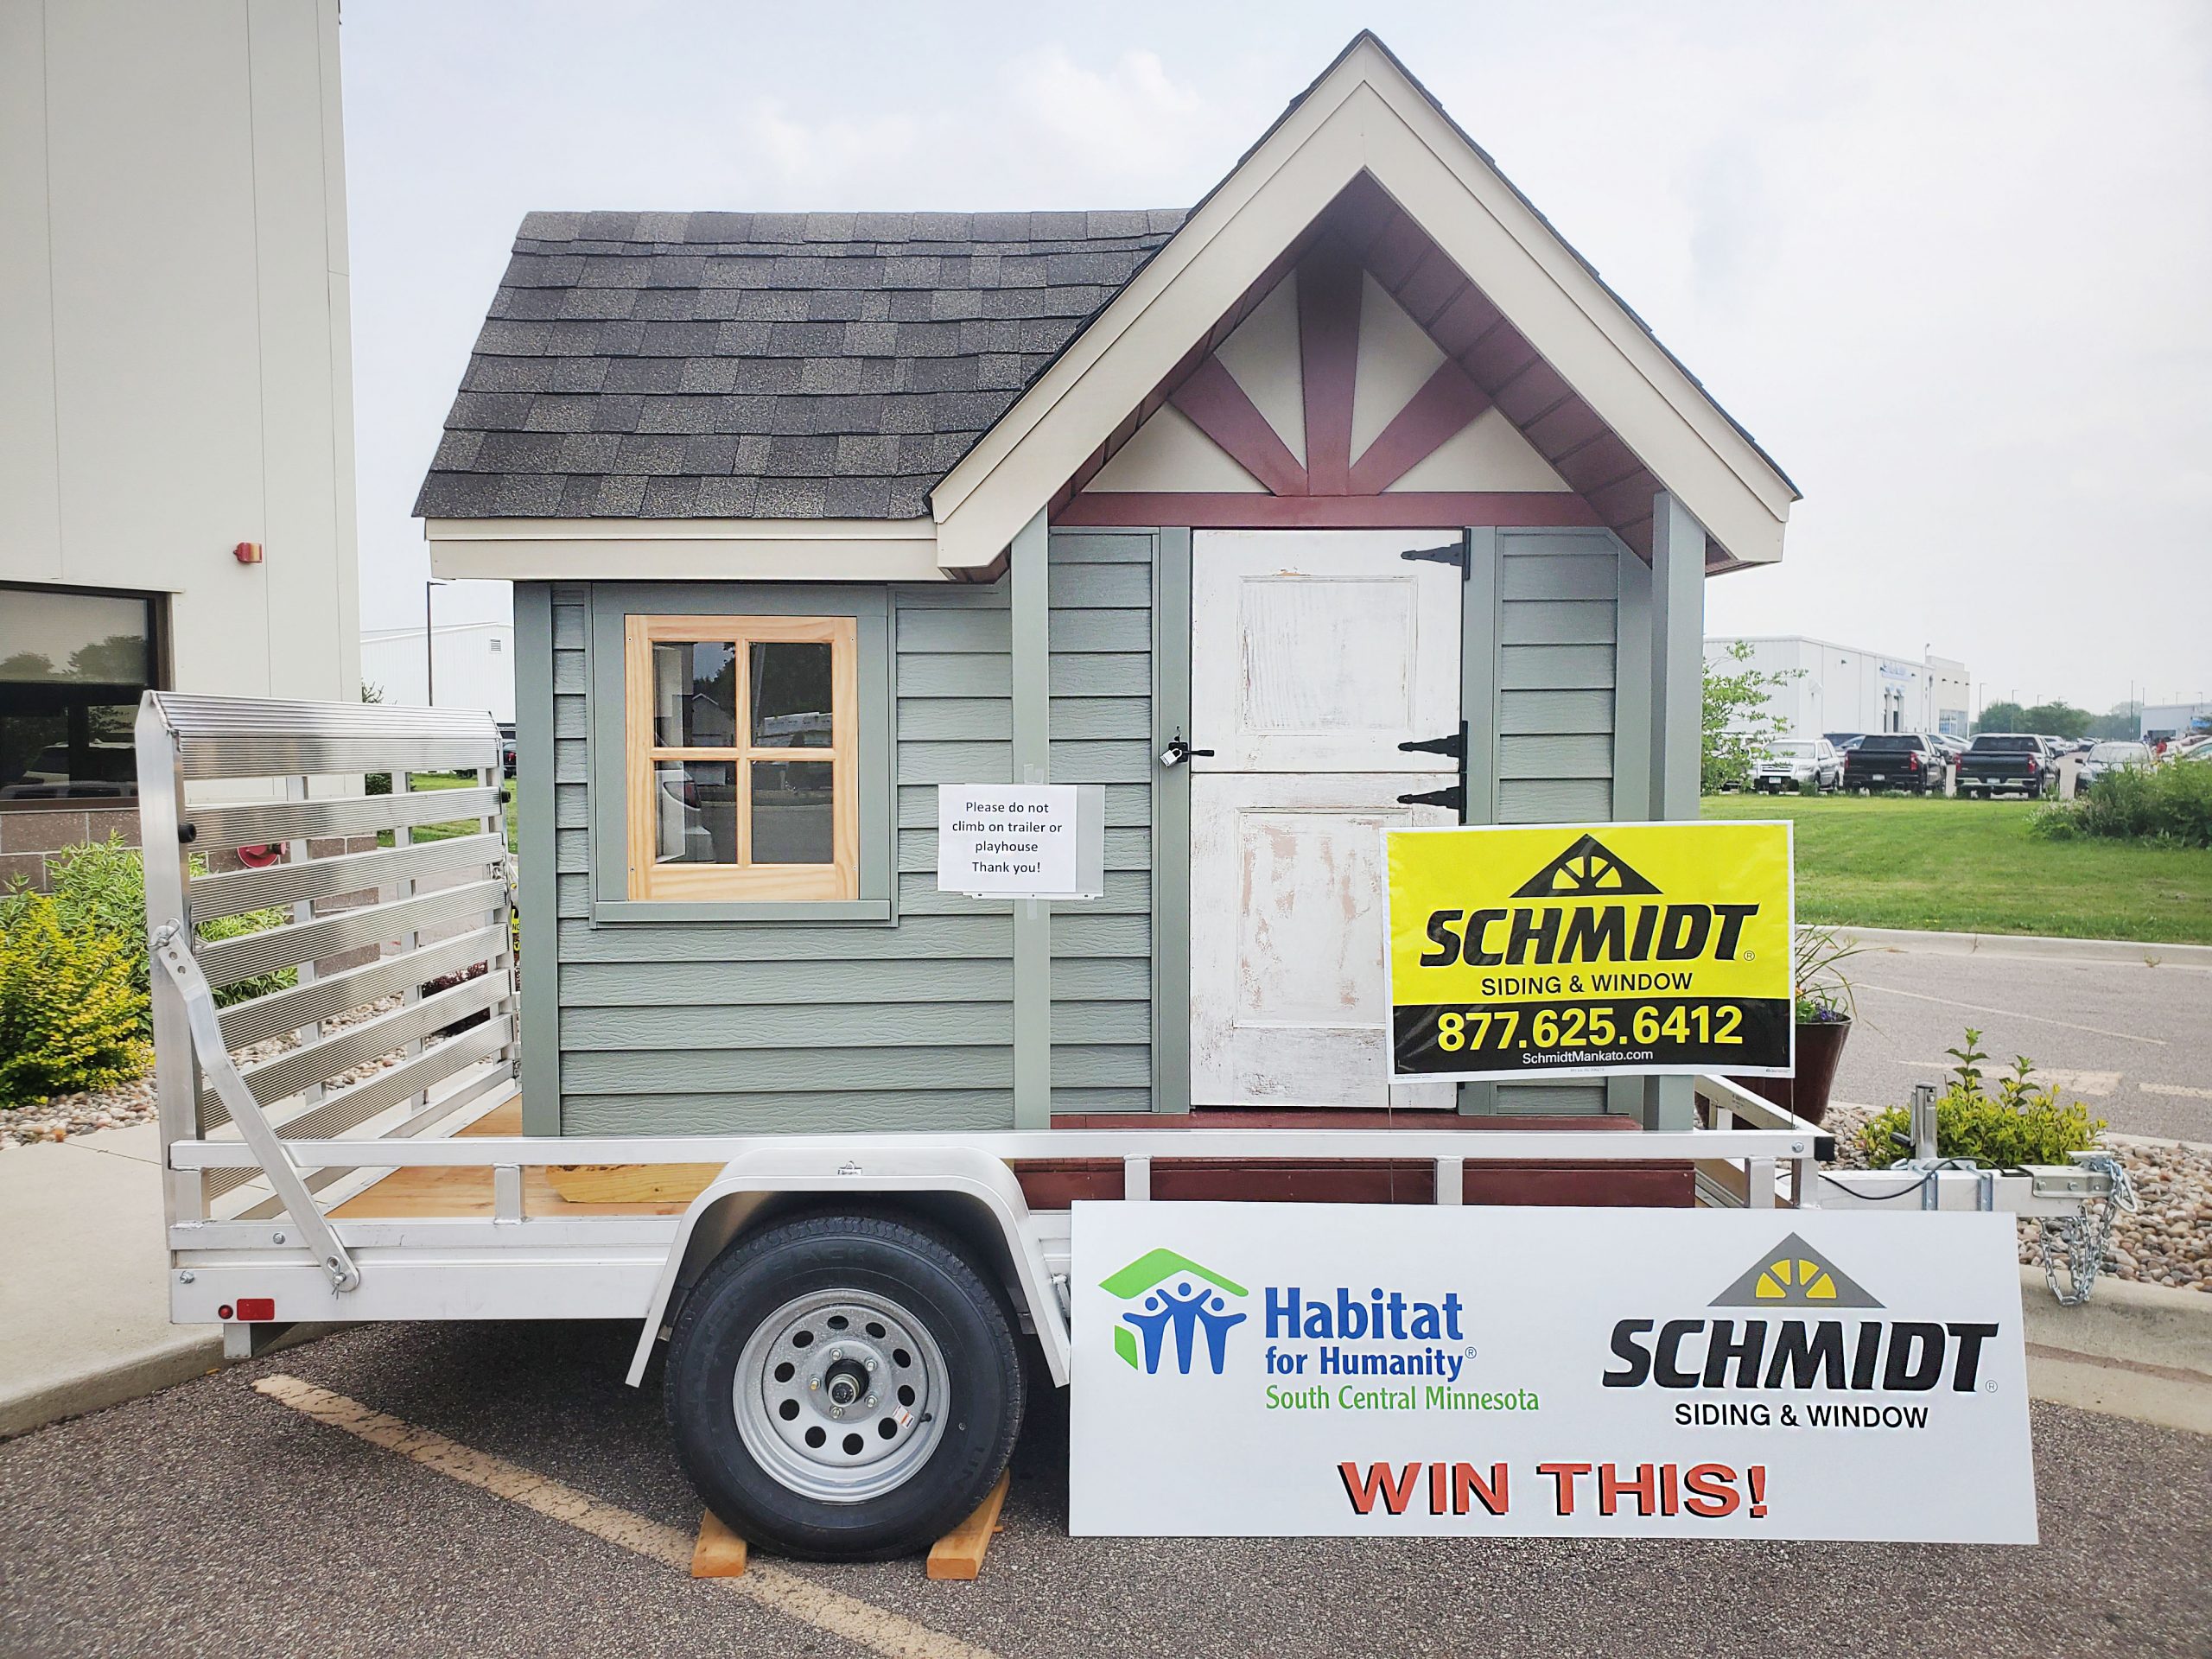 The image shows a small playhouse atop a low-sided trailer. The logo of HFHSCMN and Schmidt Siding & Window is on a sign with the words "Win this!"